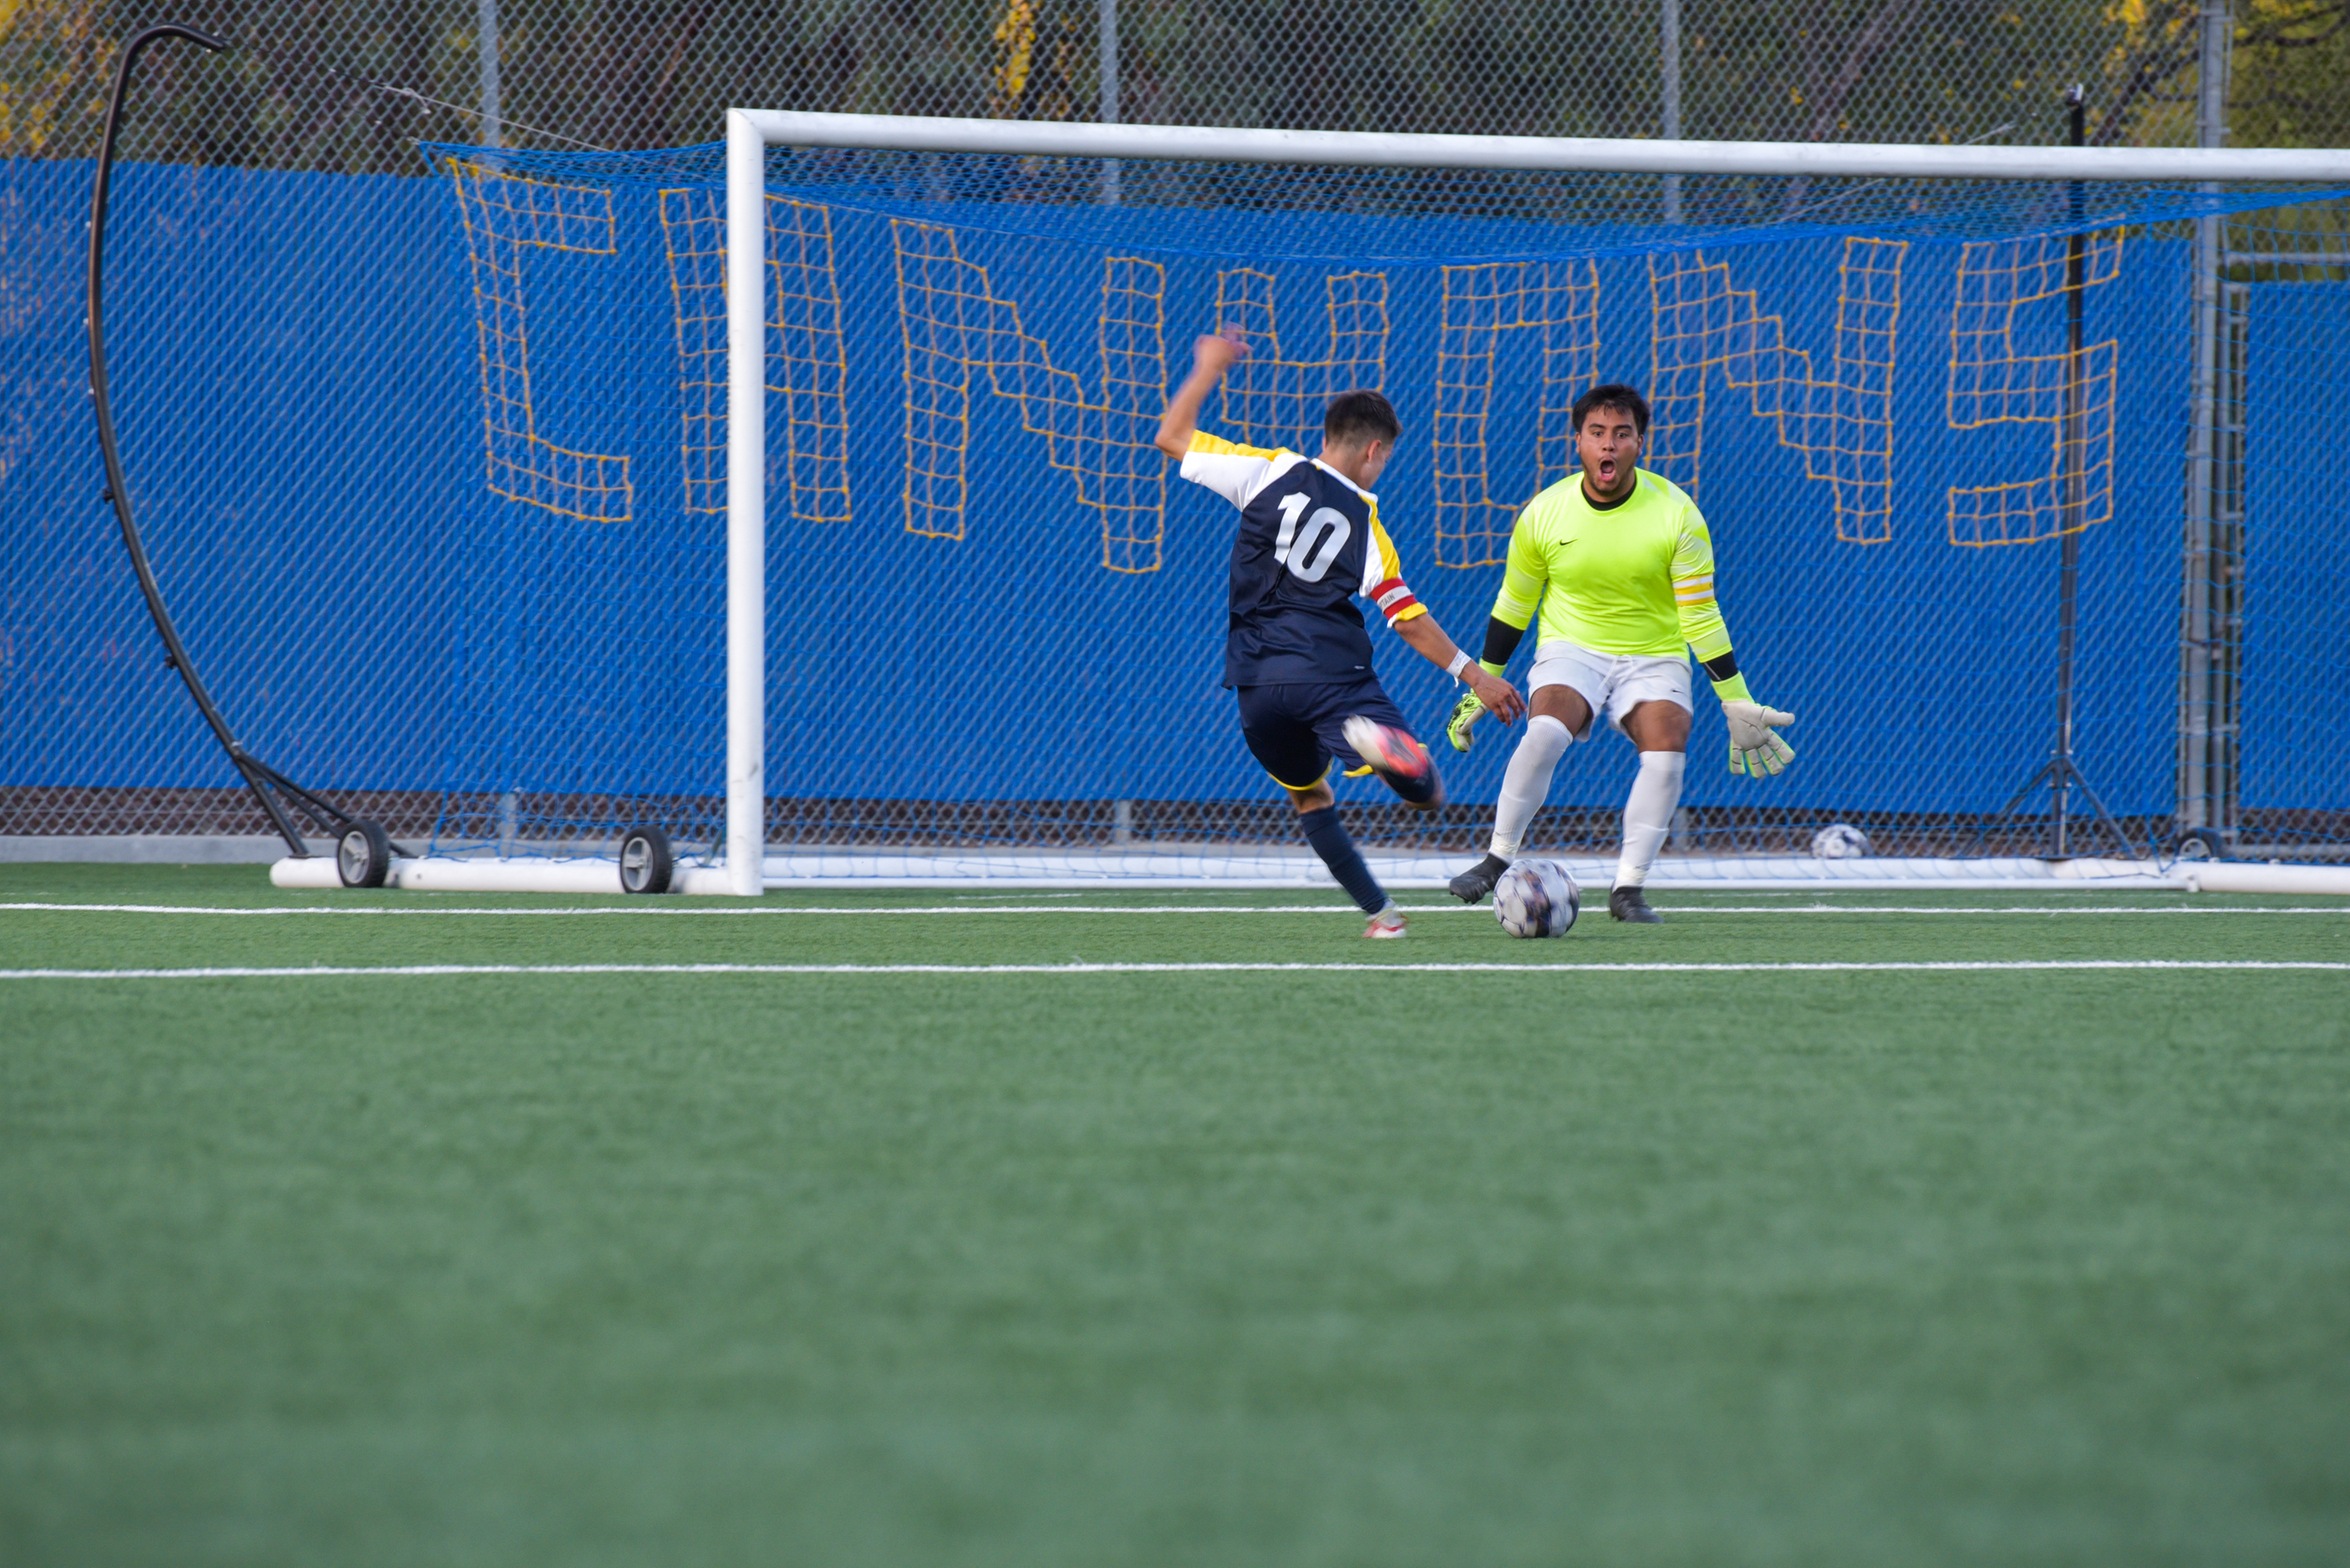 College of the Canyons sophomore Francisco Ornelas got open in space and made a nice move to beat the Pasadena City College goalkeeper and tie the game 1-1 in the 41st minute. Canyons would go on to win the match by a 2-1 final score. -Mari Kneisel/COC Sports Information